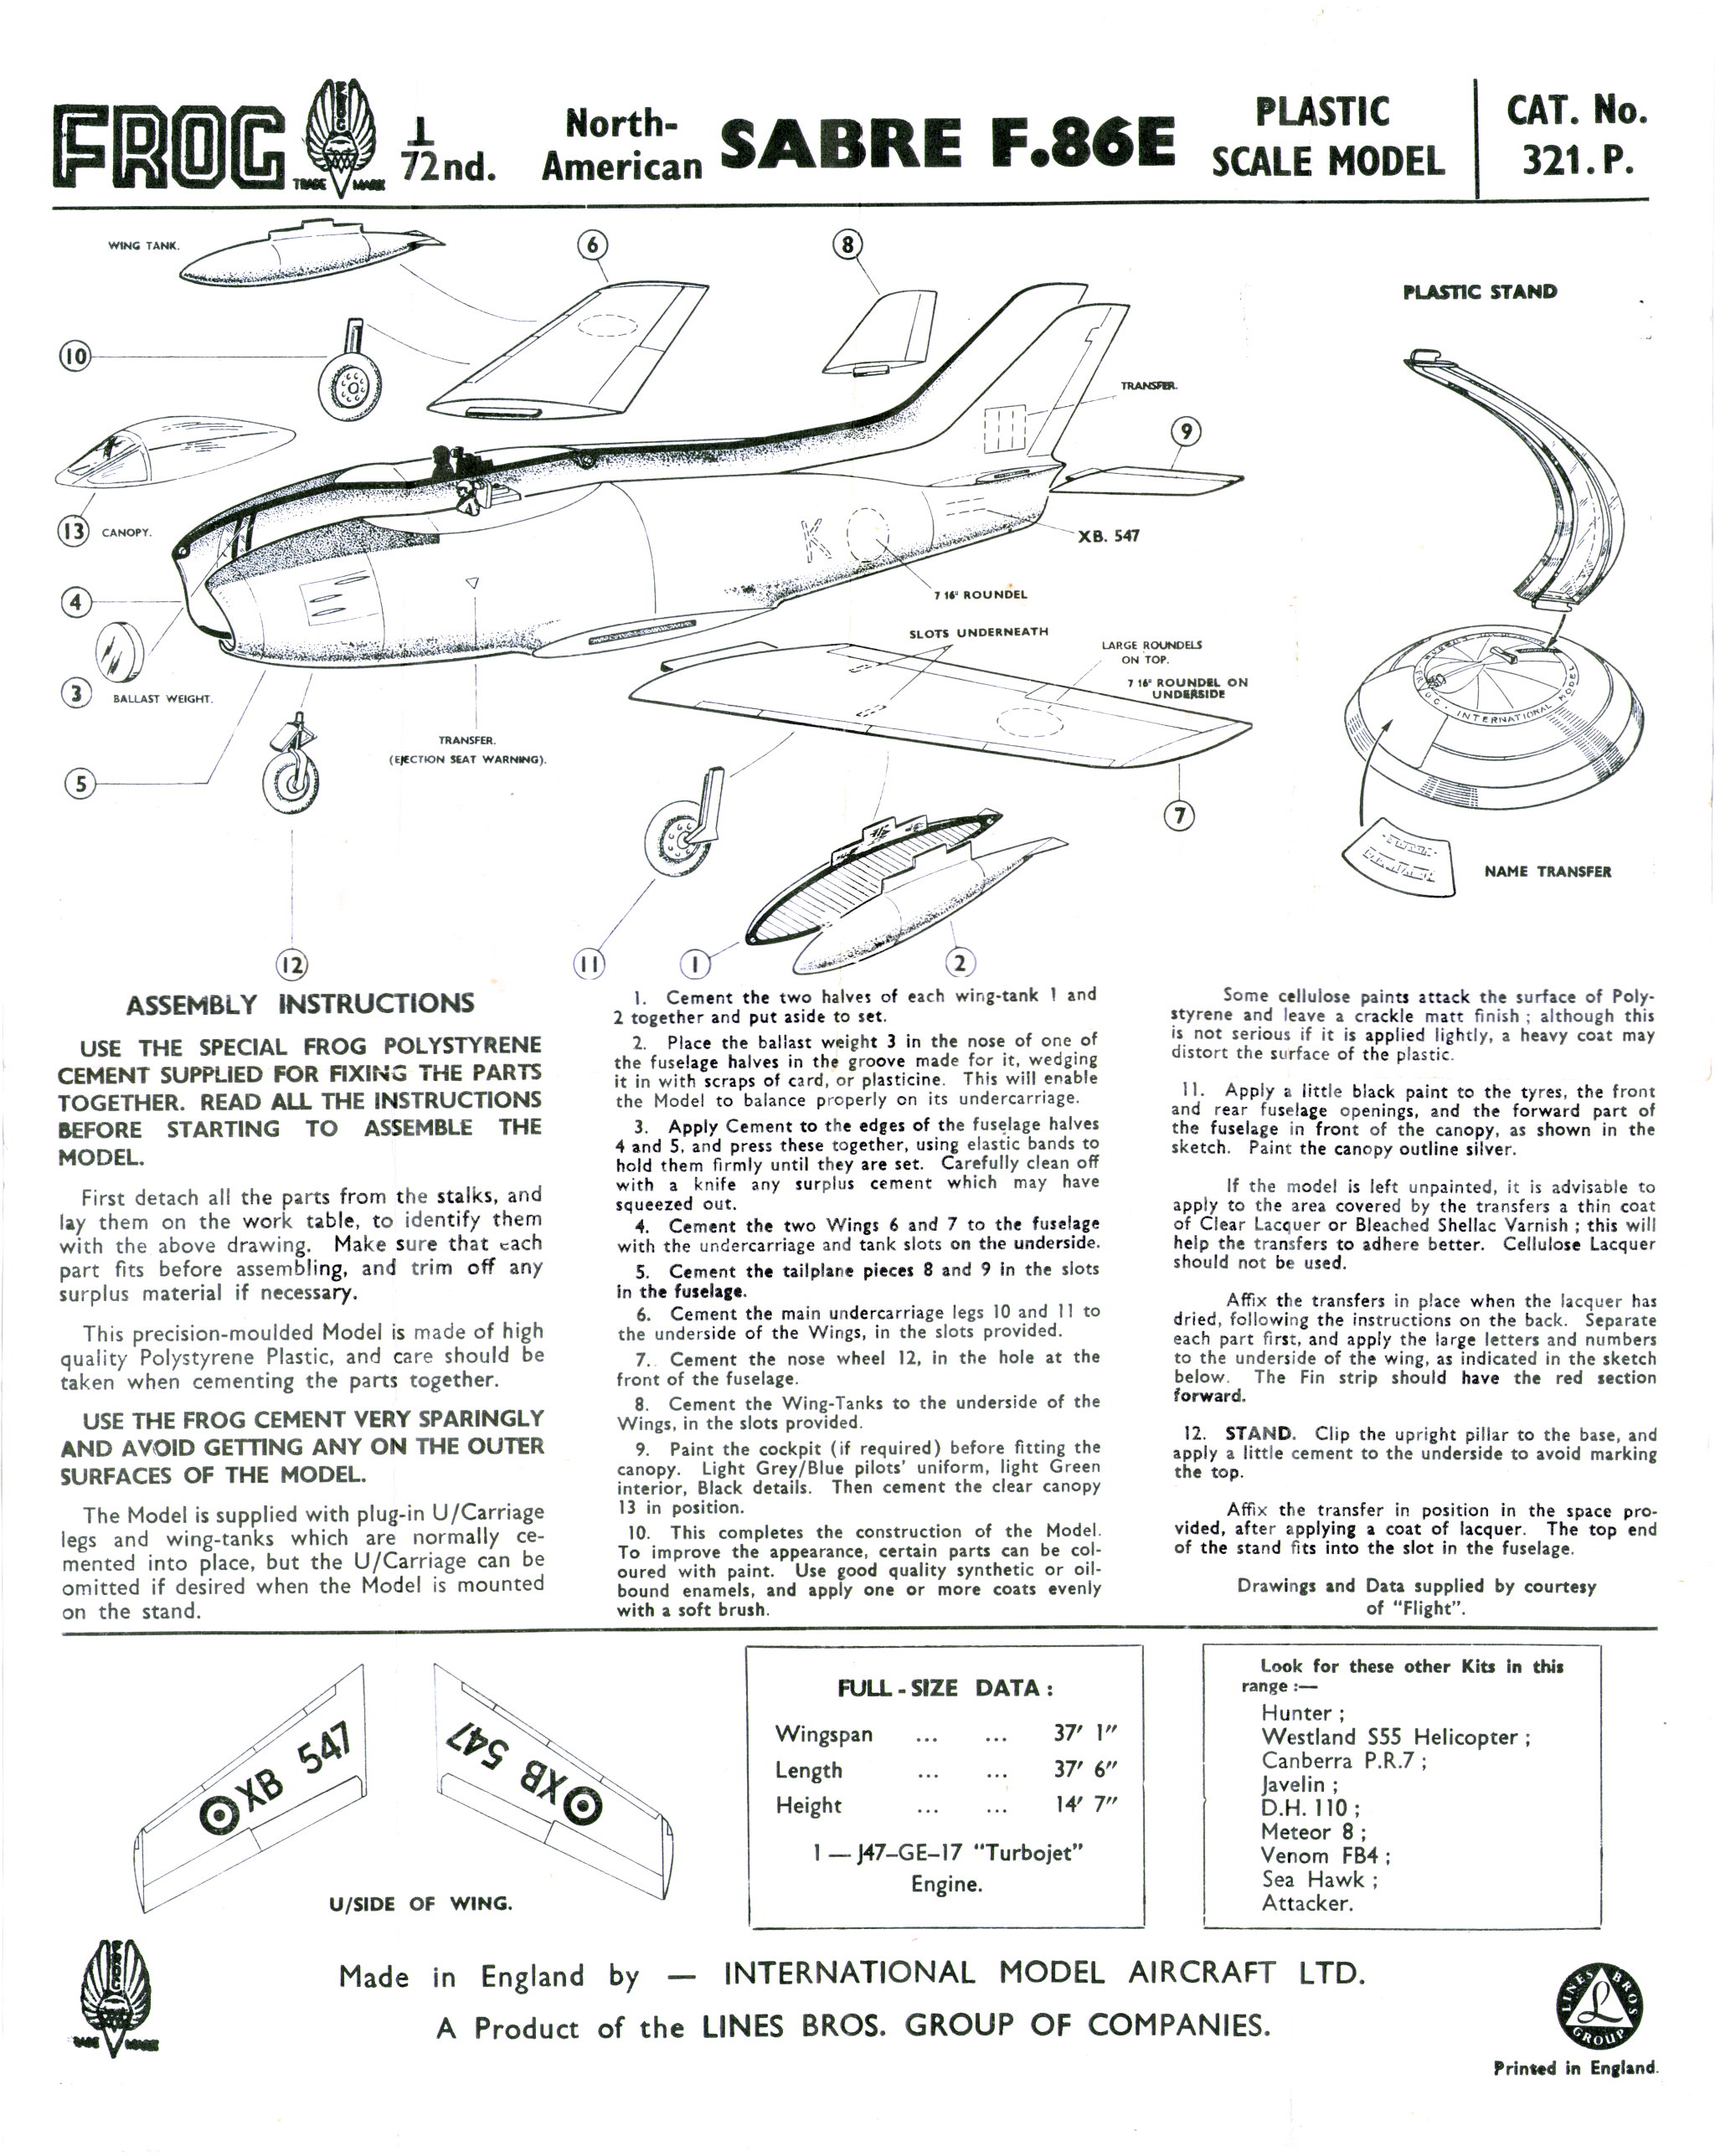 FROG 321P North American Sabre F-86E Swept Wing Jet Fighter, IMA, 1956 assembly instructions